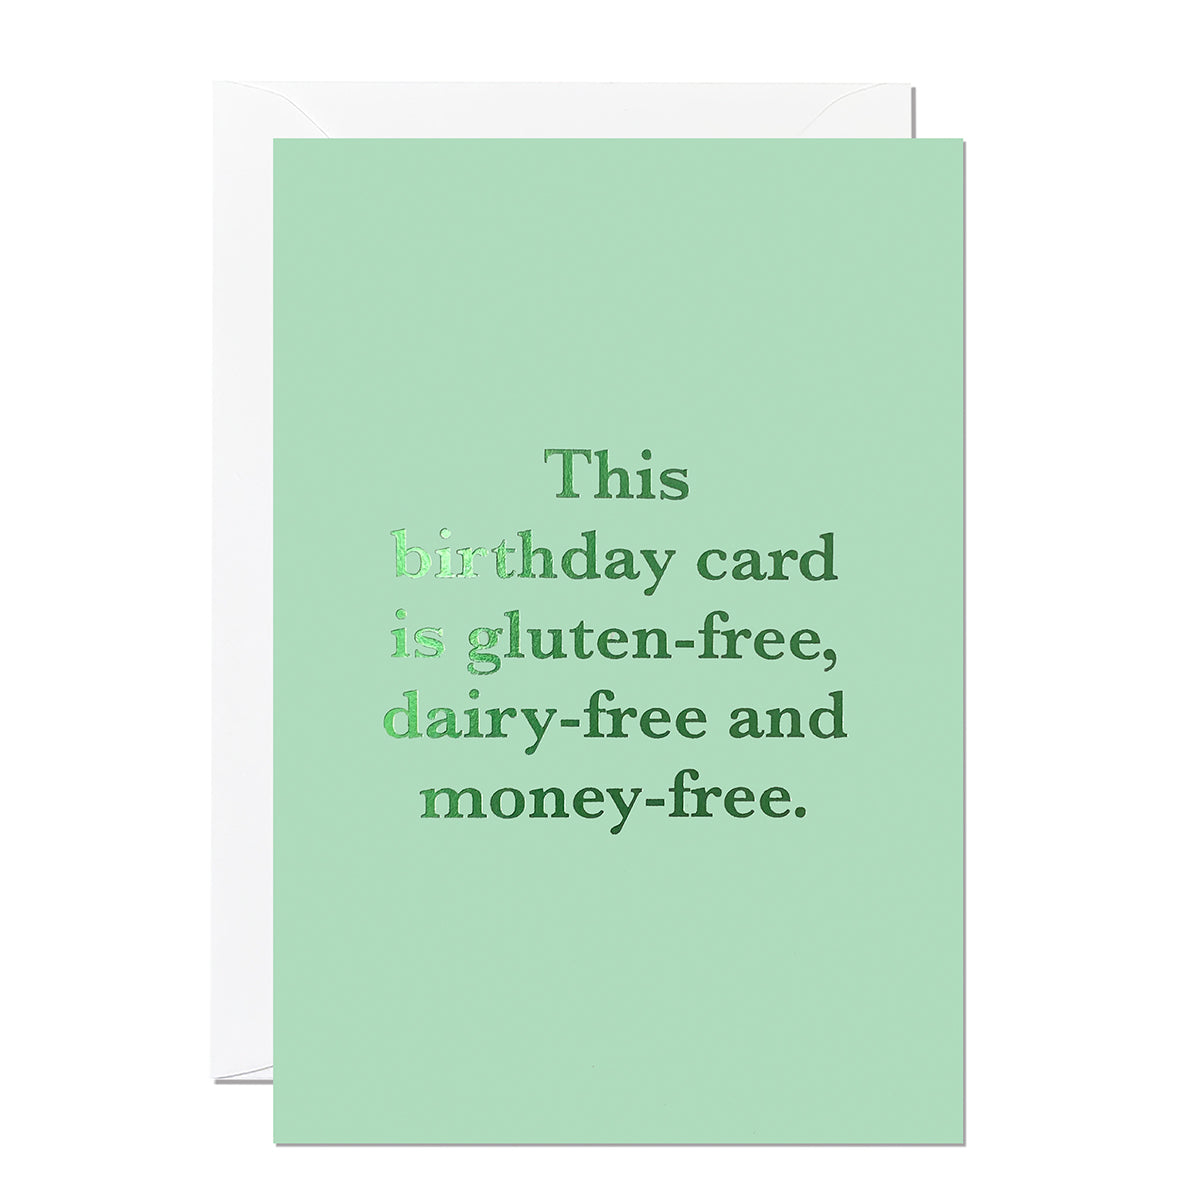 This birthday card is perfect for anyone with a lighthearted sense of humour. It says 'This birthday card is gluten-free, dairy-free and money-free.' It's printed with a luxe green hot foil on a light green background.